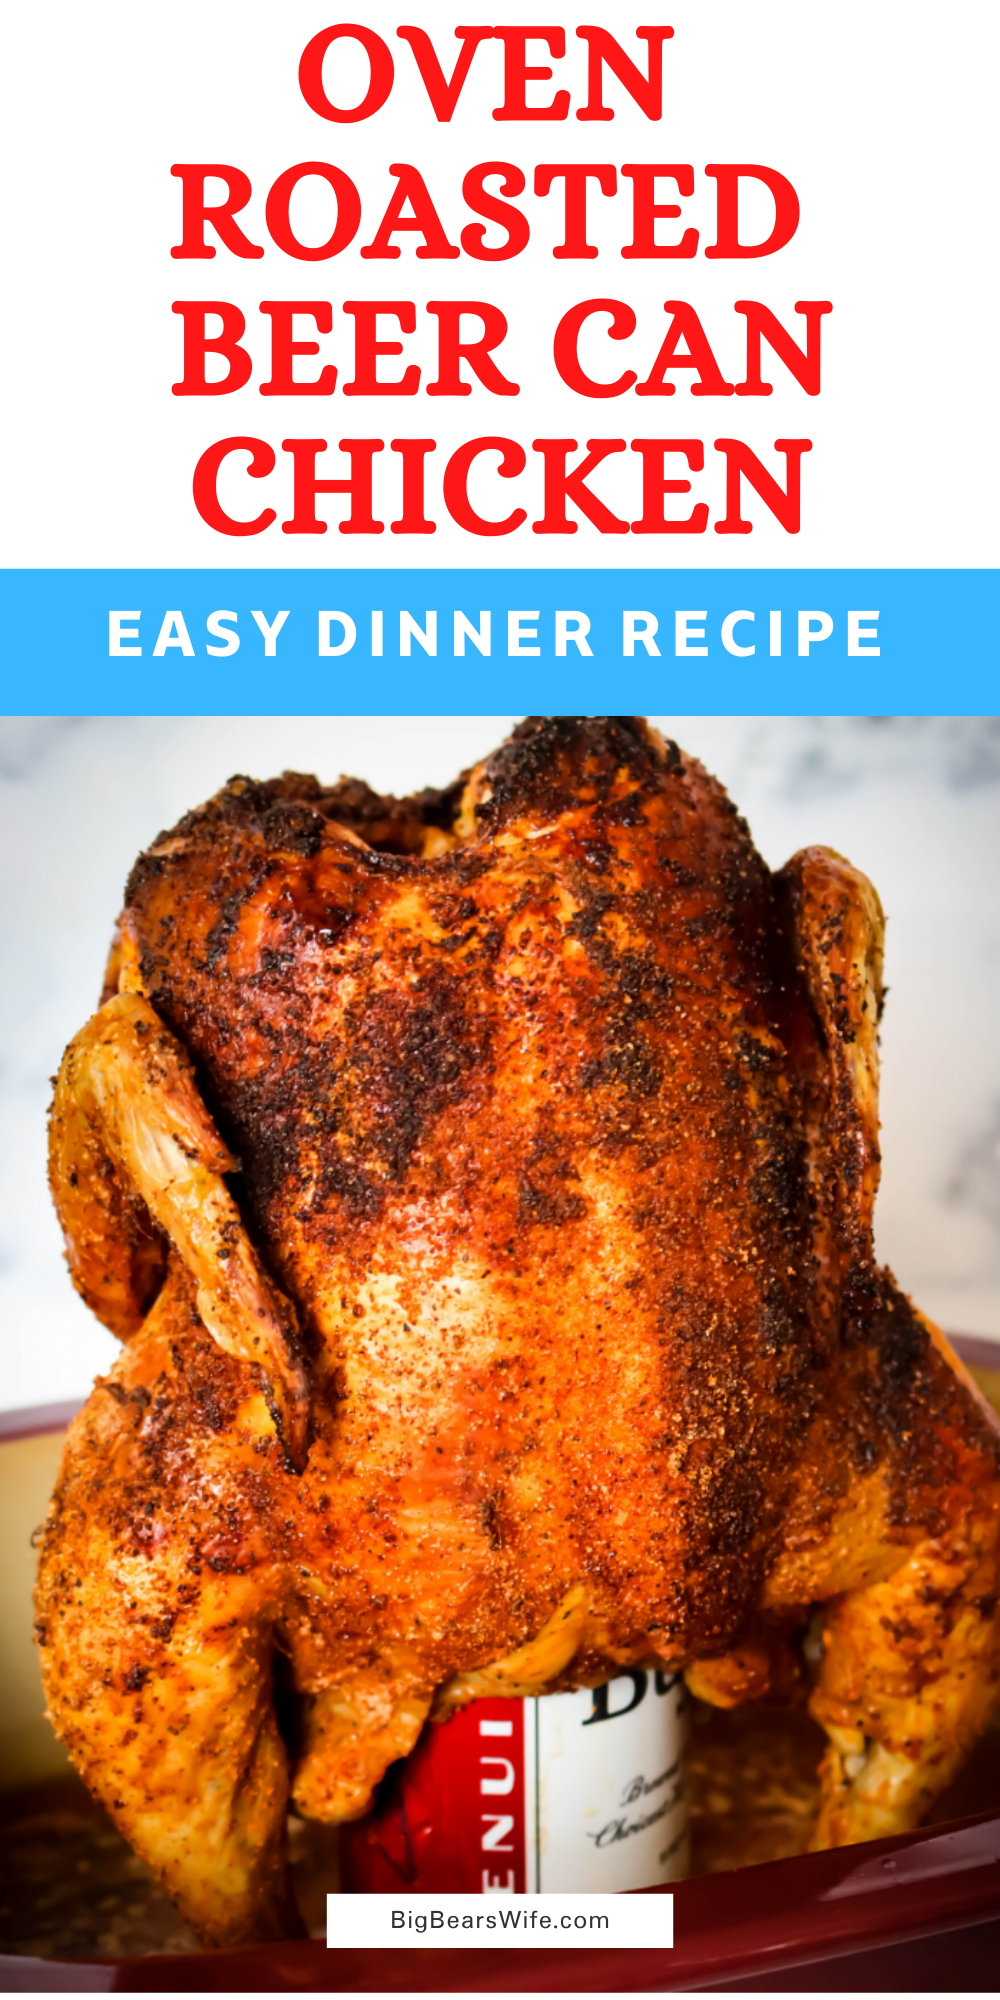 Oven Roasted Beer Can Chicken - Have you ever made Beer Can Chicken? I'm going to show you exactly how to make the most amazing Beer Can Chicken, in the oven, with only 3 ingredients!  via @bigbearswife